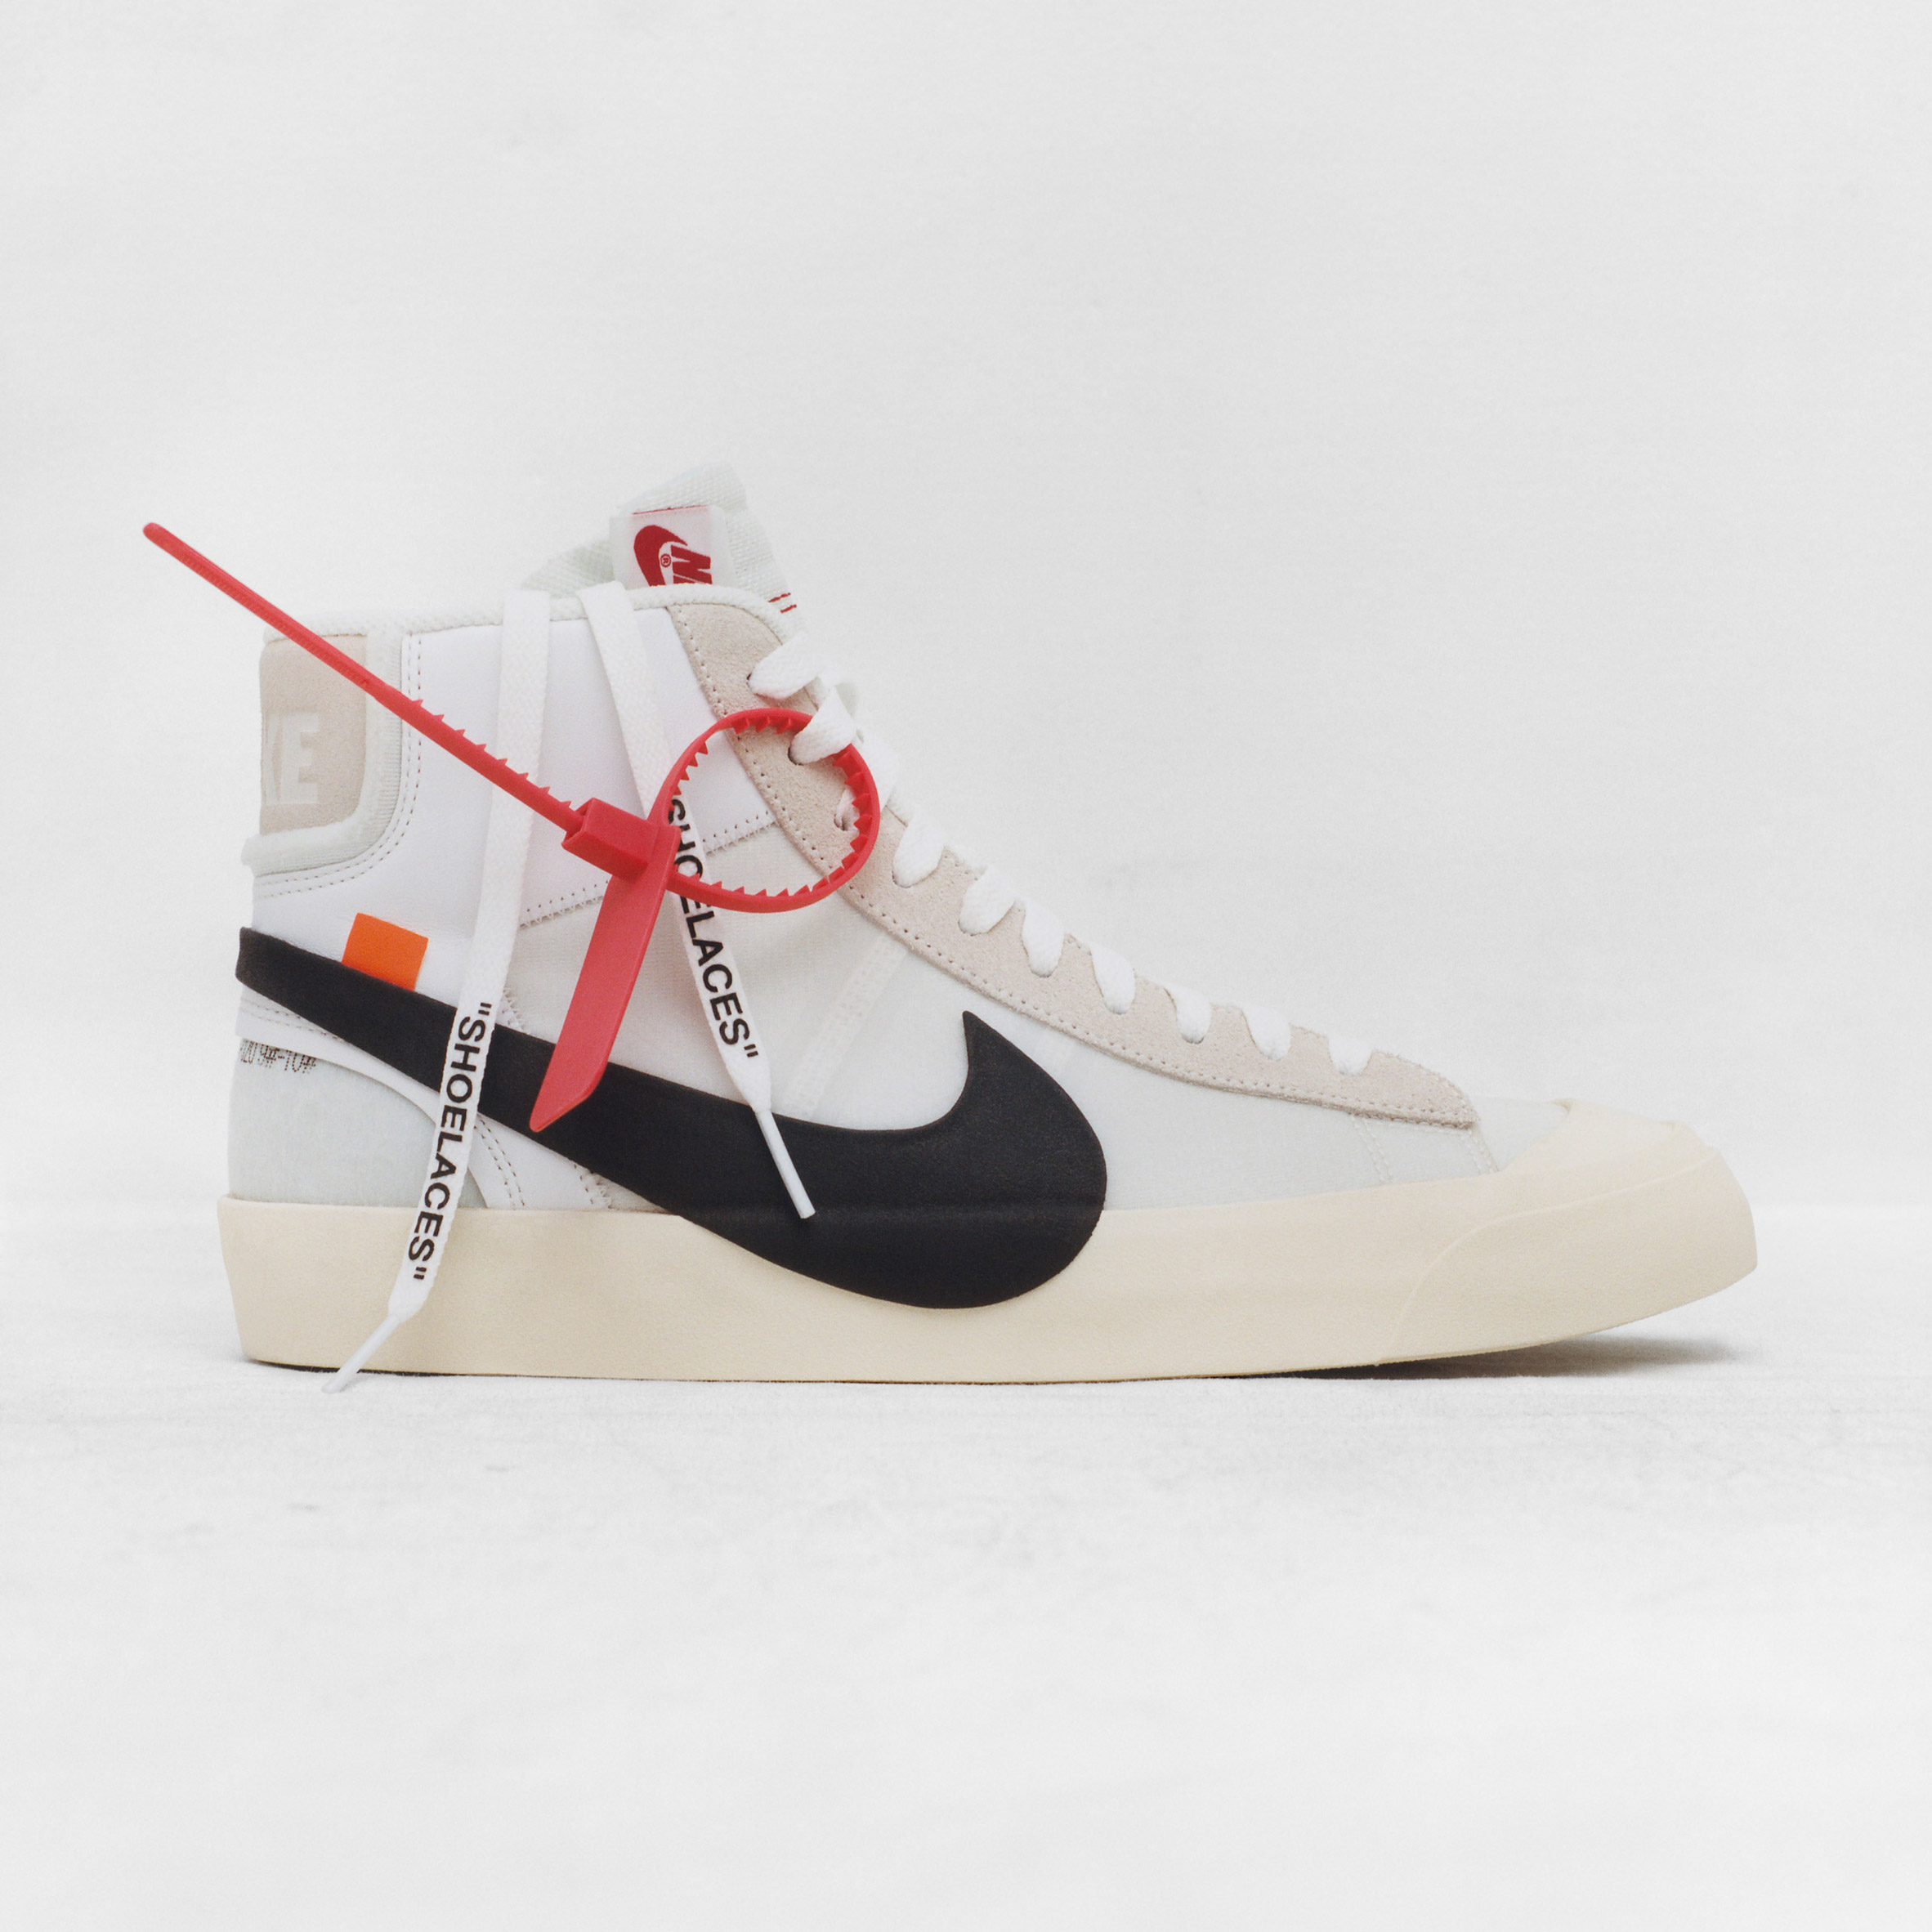 Virgil Abloh's The Ten collaboration with Nike